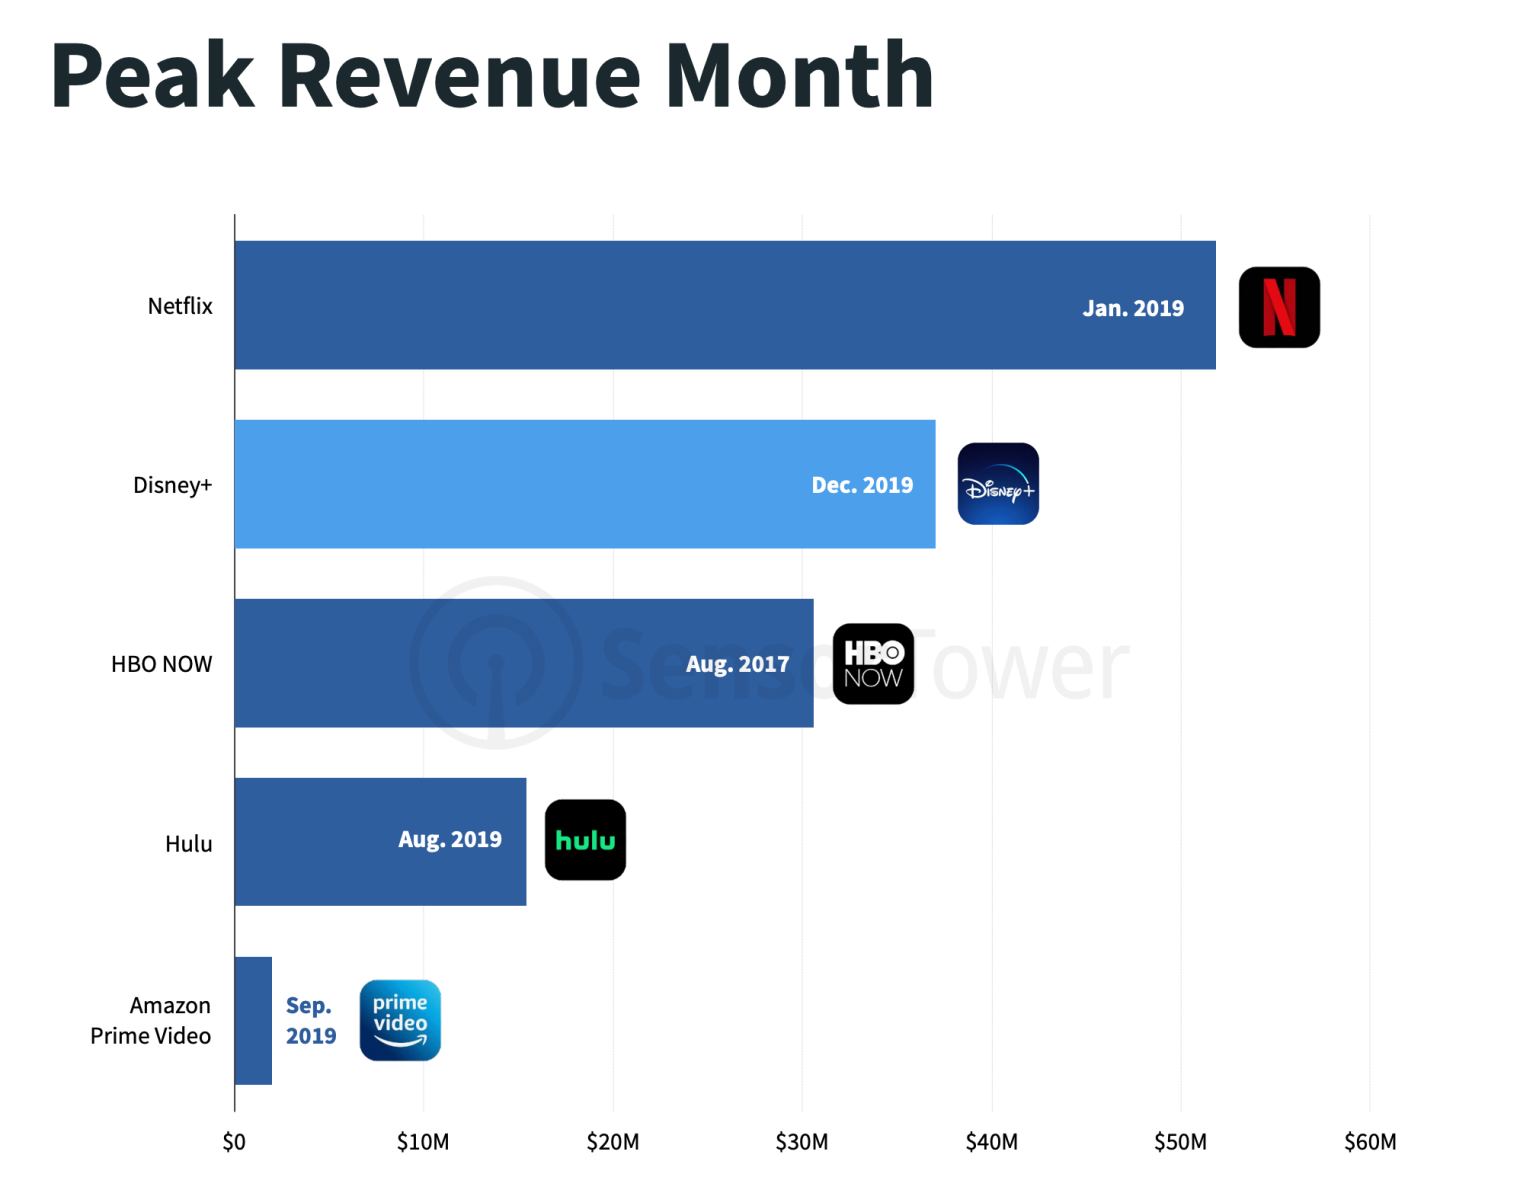 Frontline | Disney + is the most downloaded app in the United States in the fourth quarter of 2019, which is twice as much as TikTok